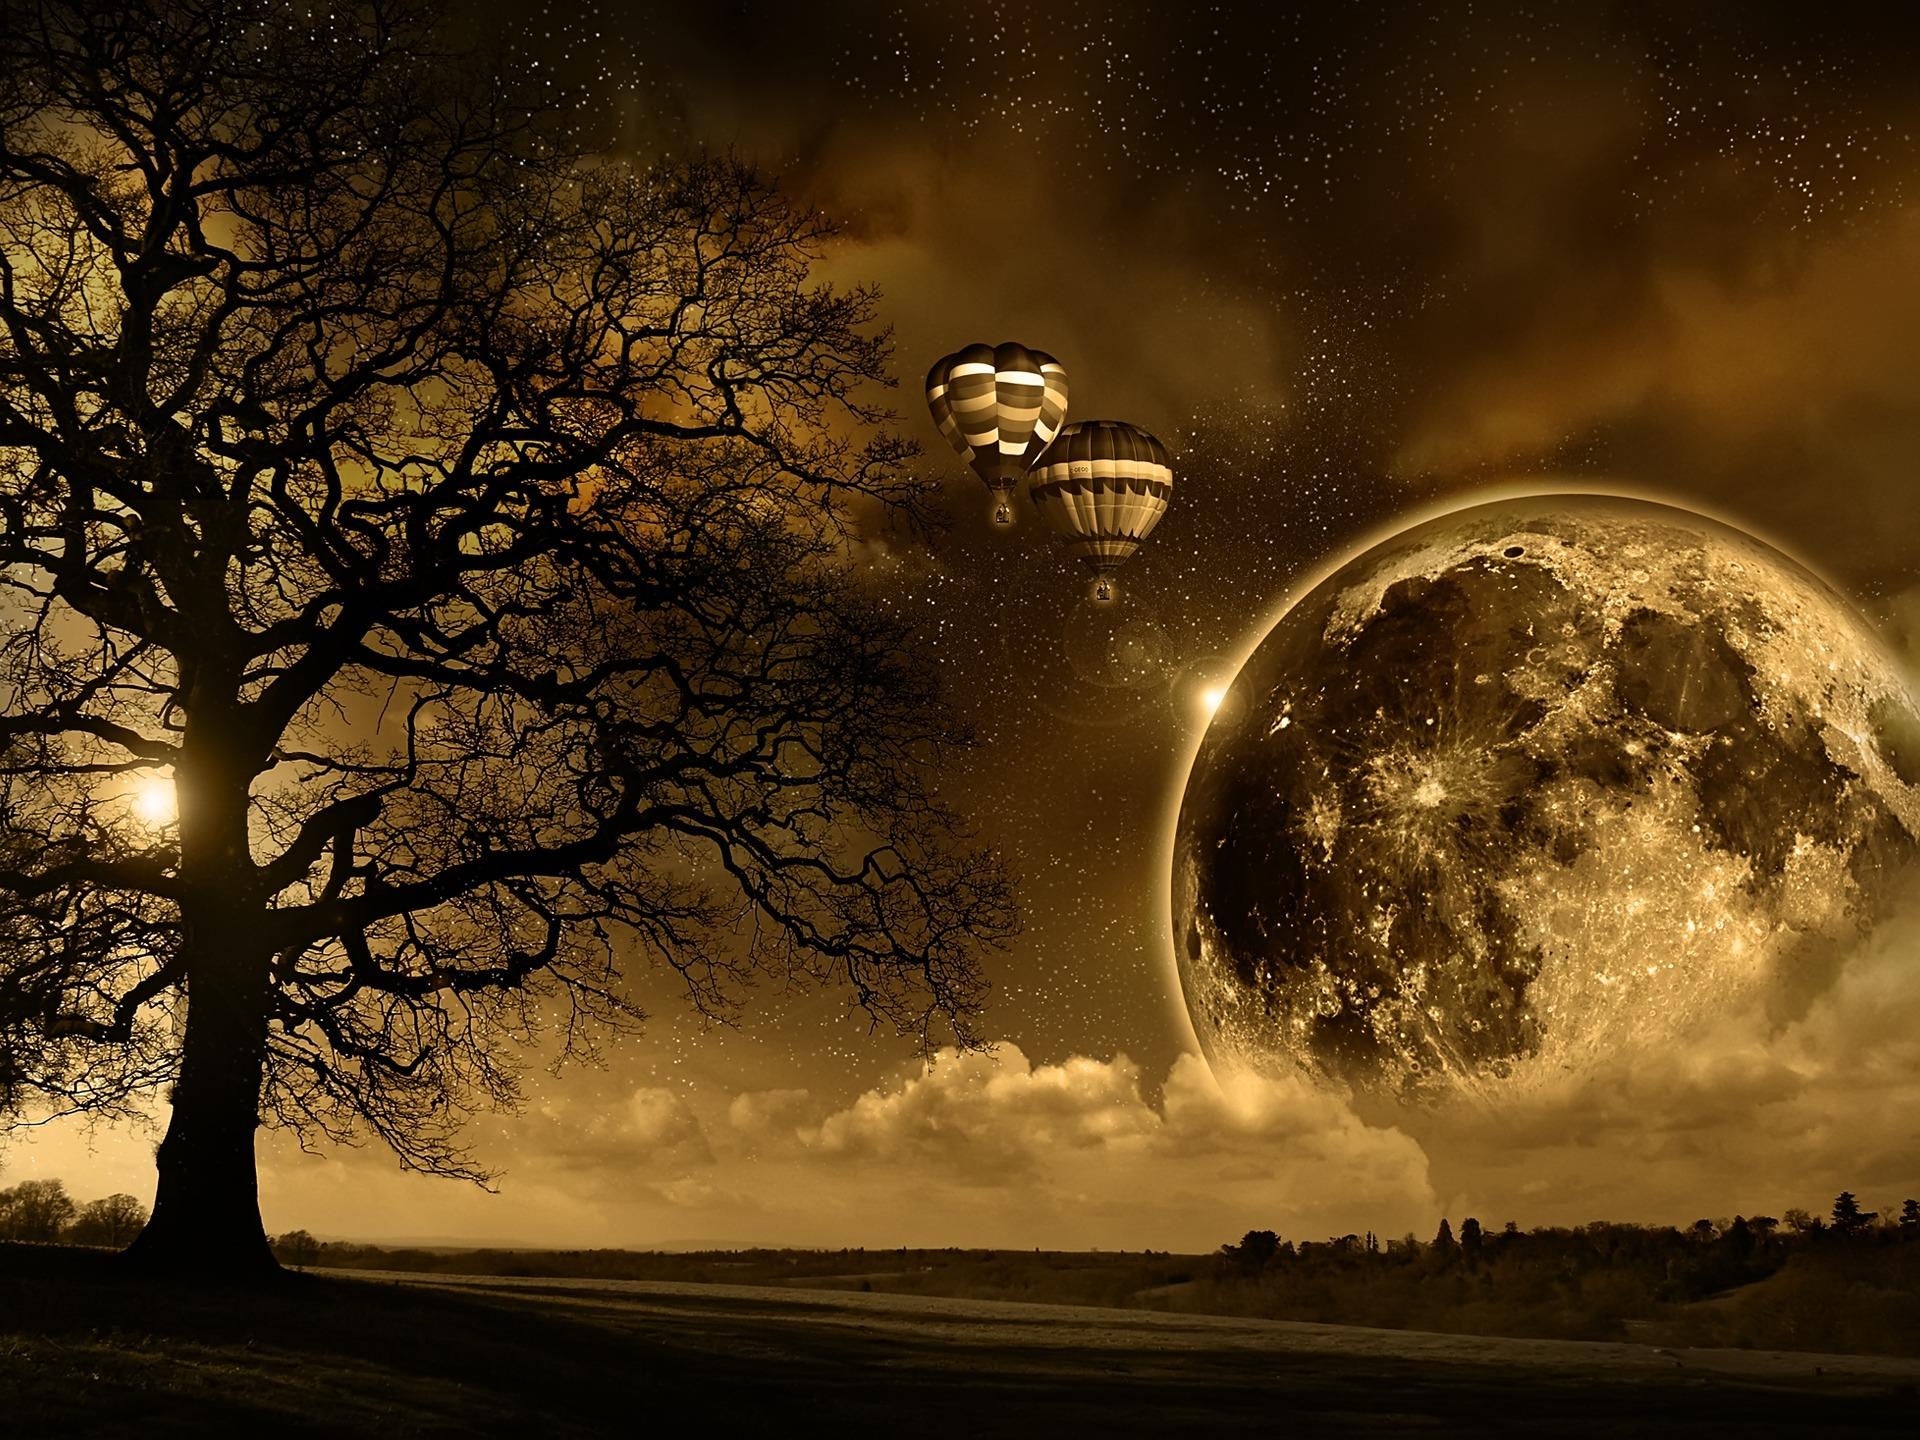 Magic Moon Wallpaper Abstract 3D Wallpaper in jpg format for free